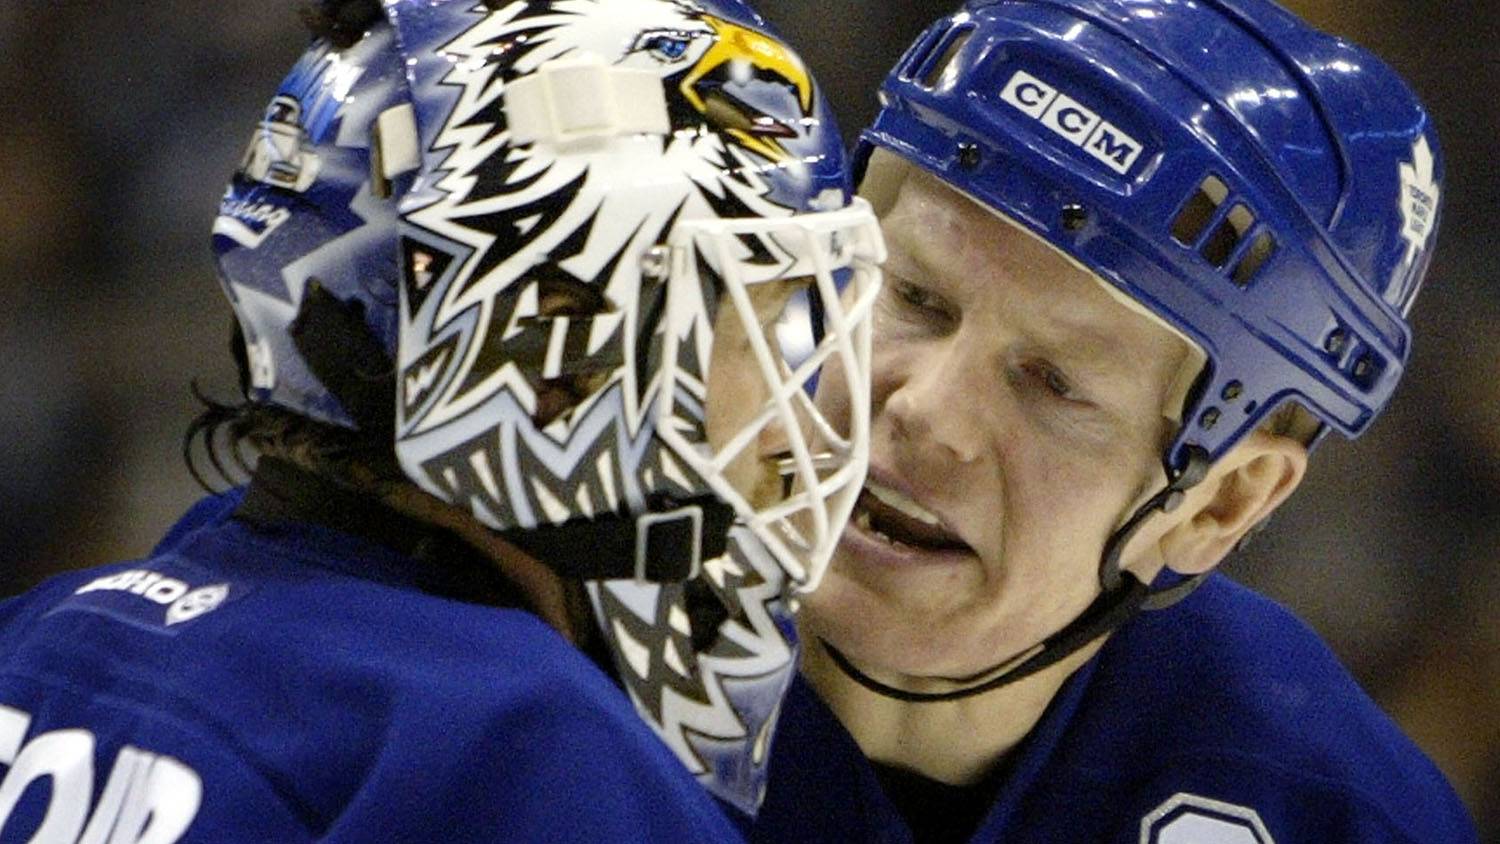 Mats Sundin will not play for Maple Leafs in alumni game Saturday